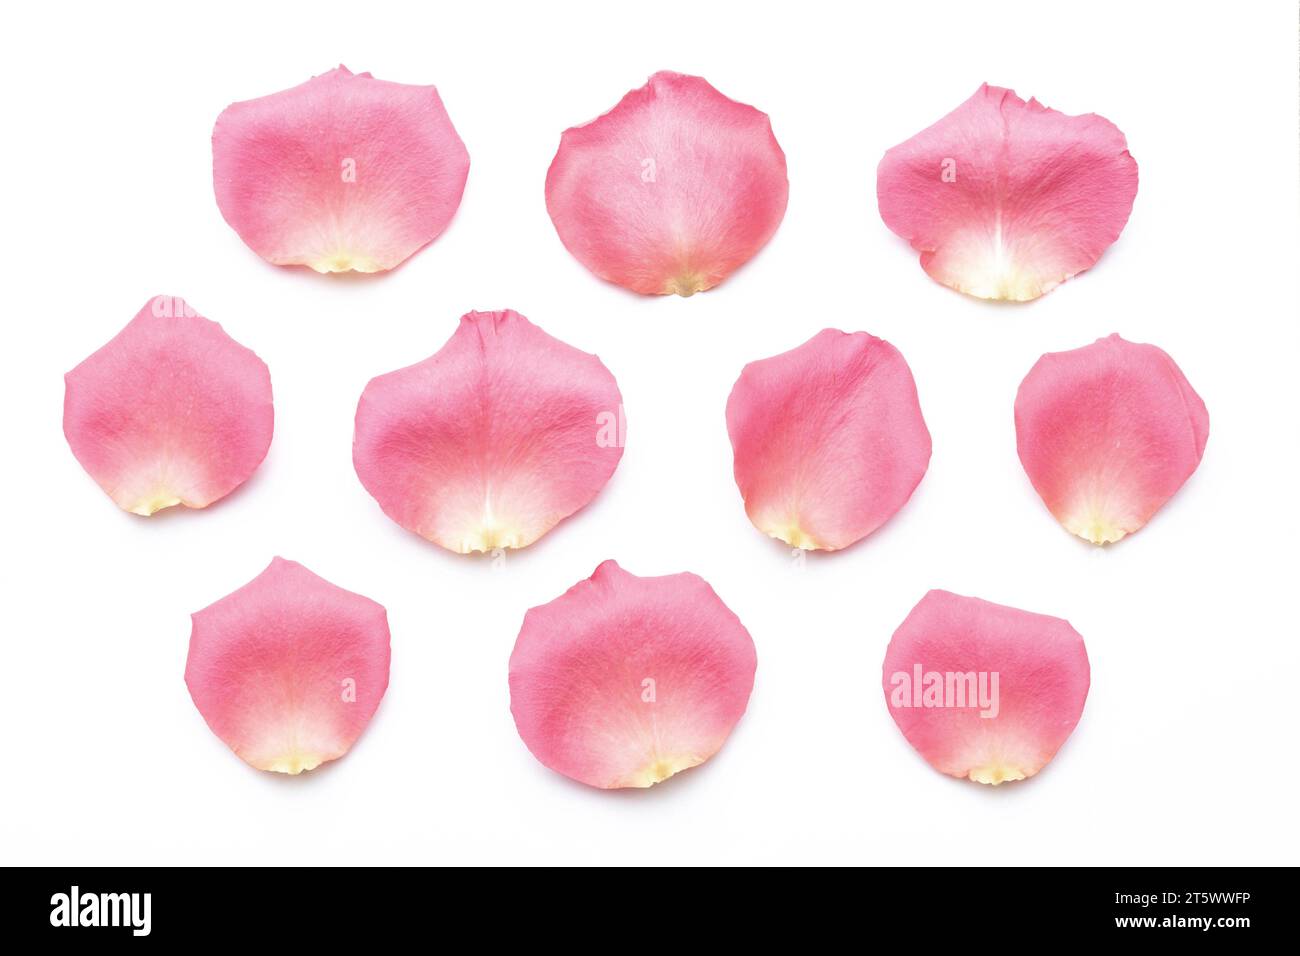 Rose flower petals isolated on white background Stock Photo